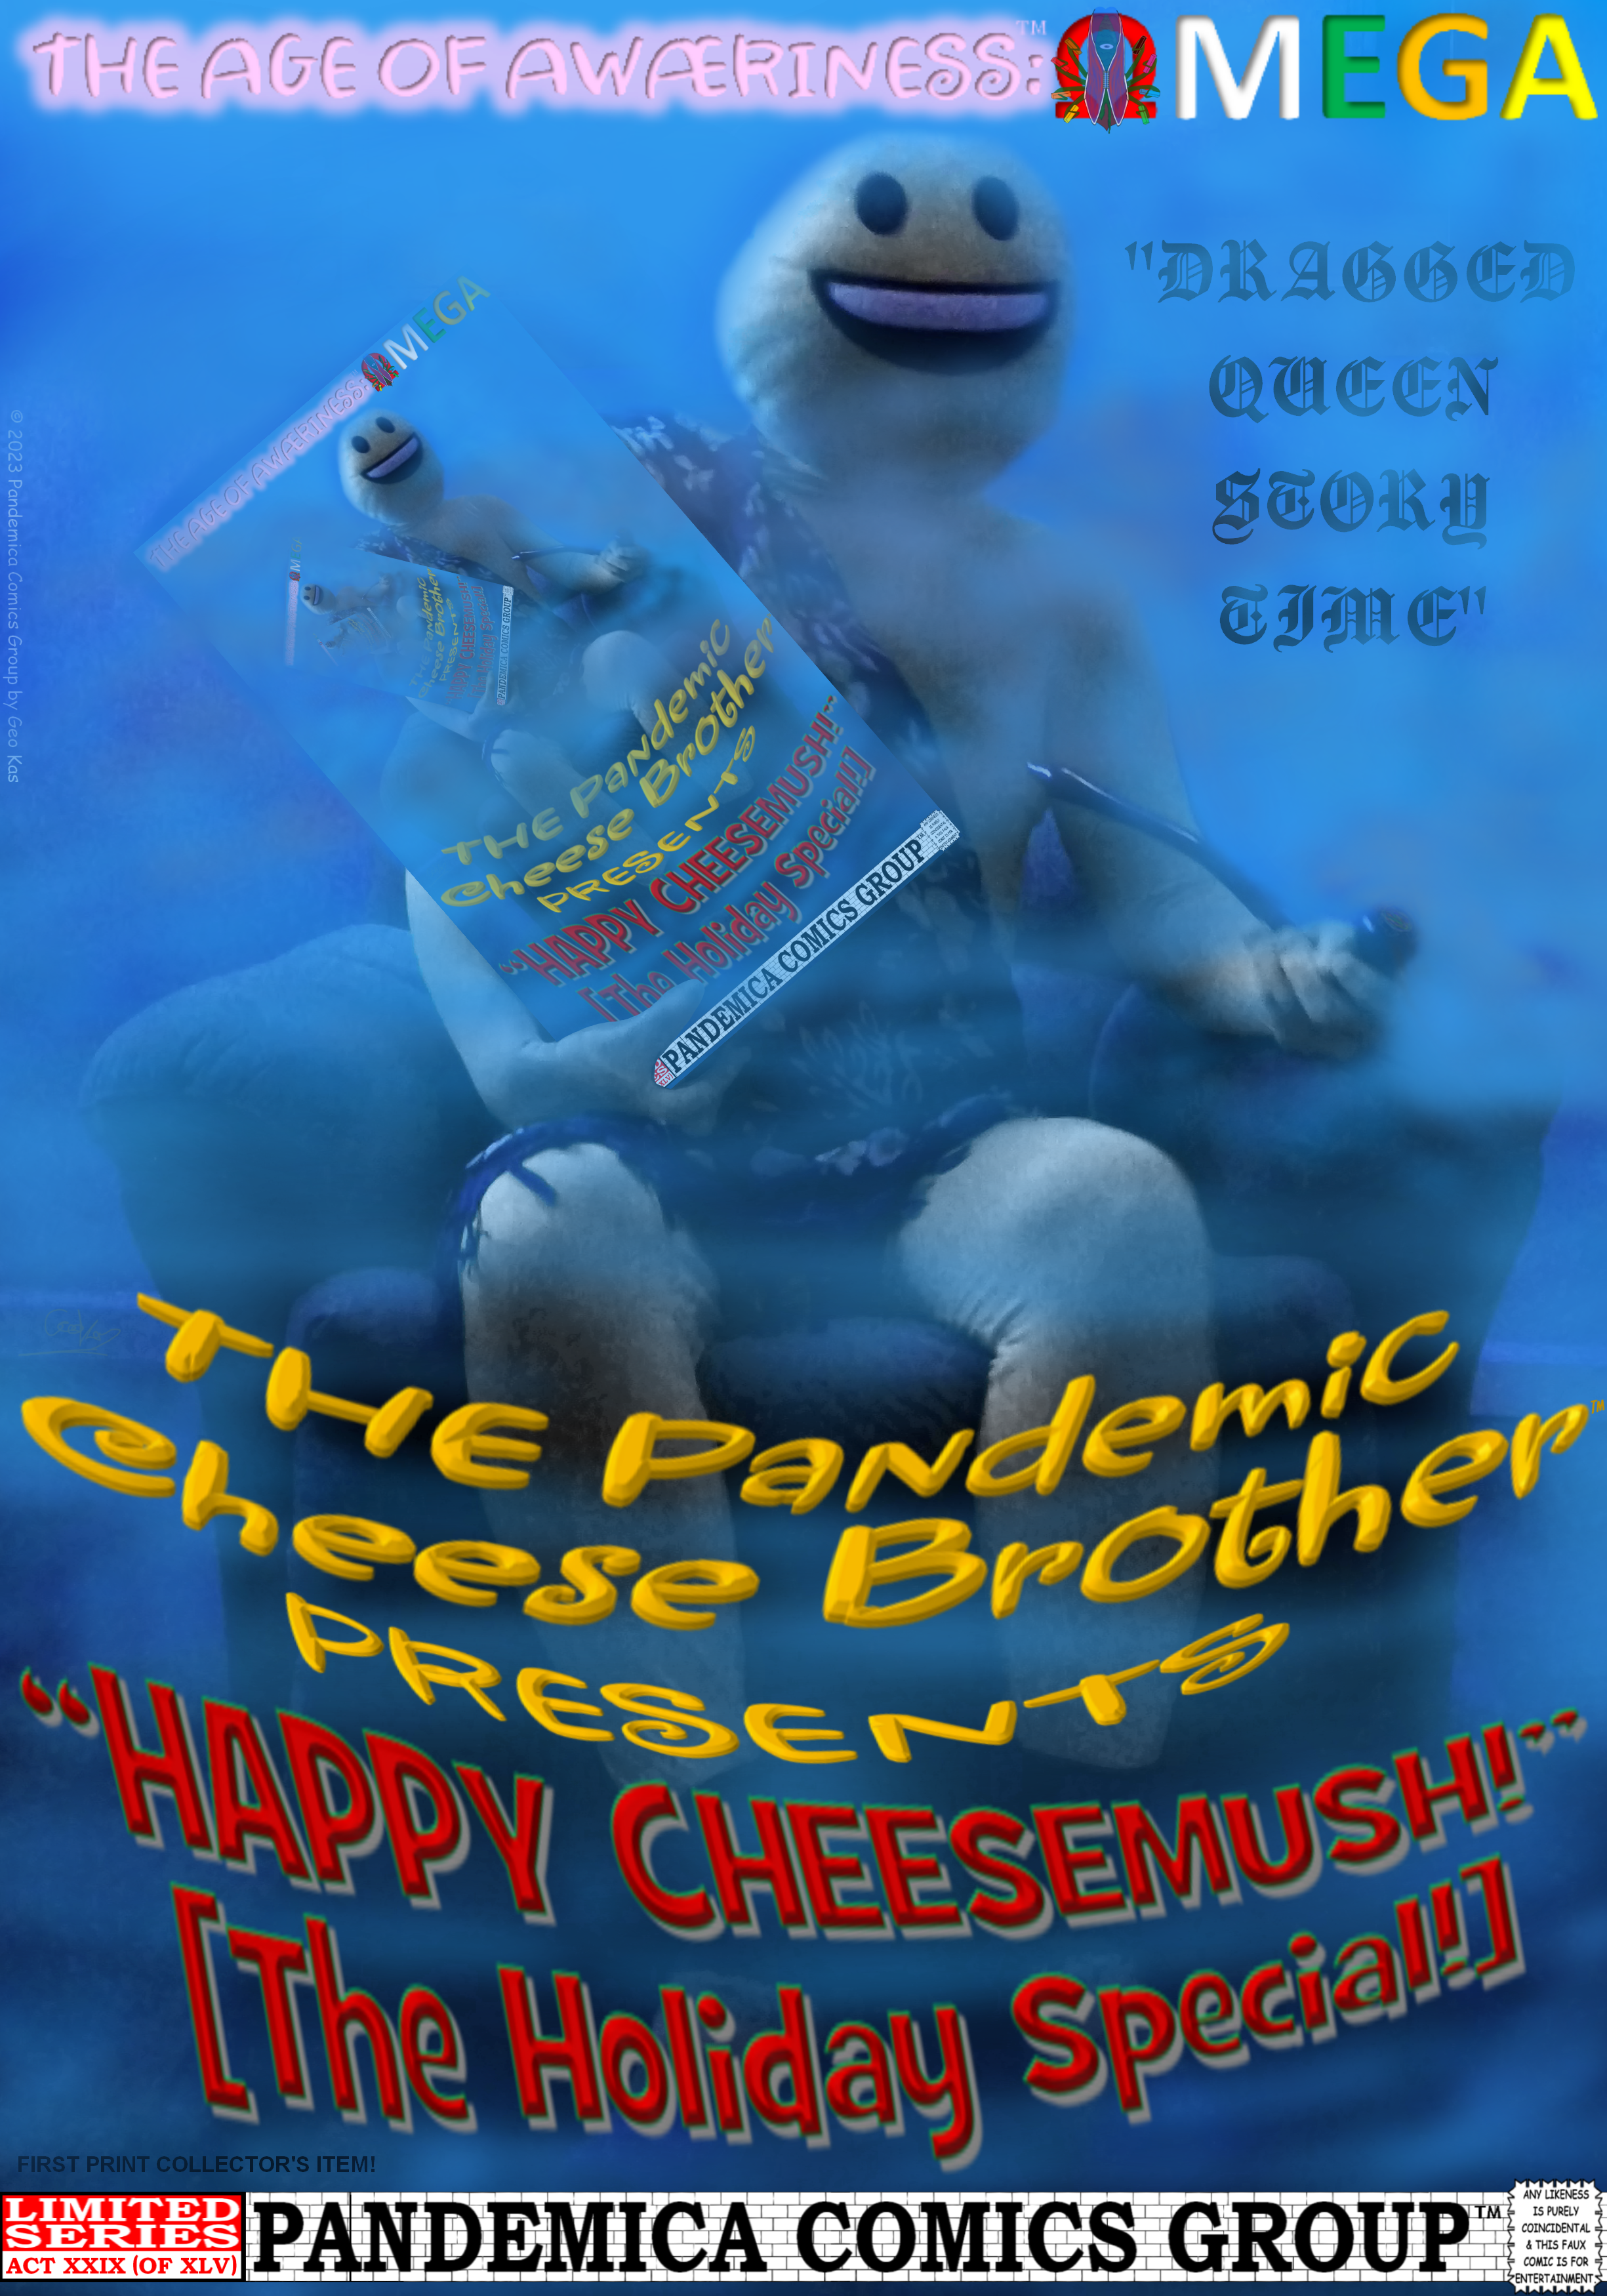 The Pandemic Cheese Brother Presents: Happy Cheesemush! [The Holiday Special!]